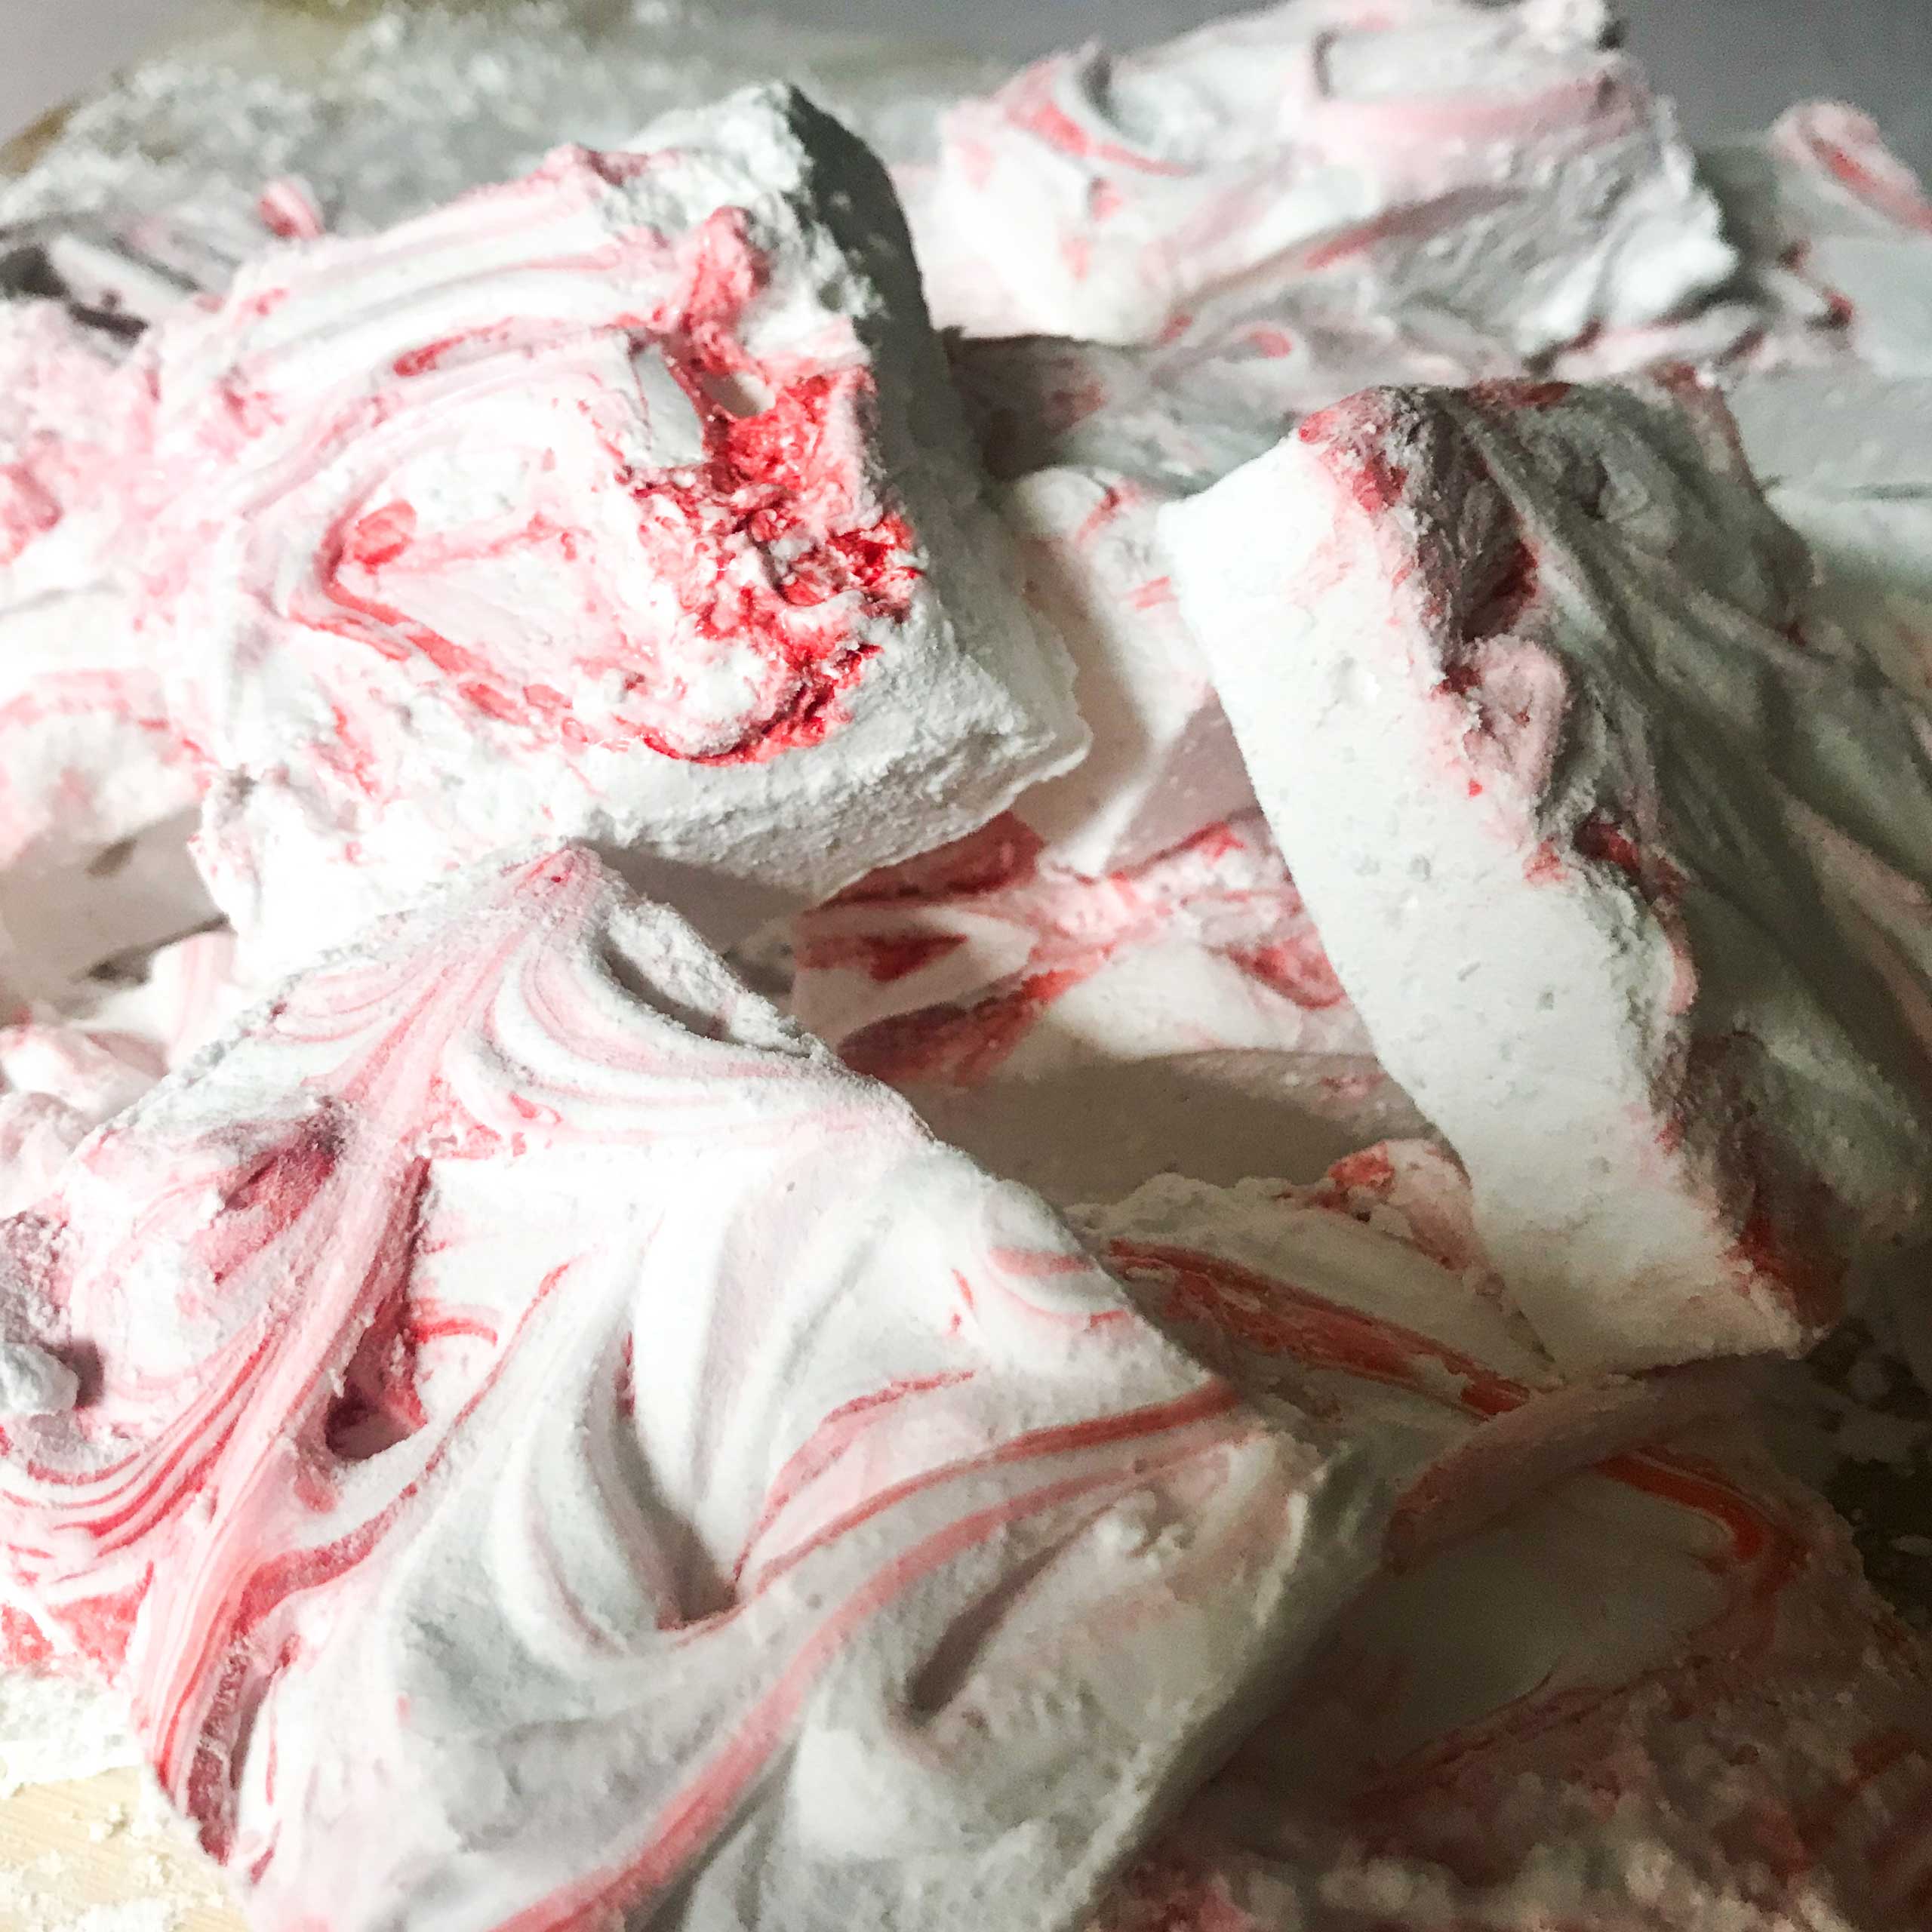 Swirling Chocolate Peppermint Bark | My Curated Tastes